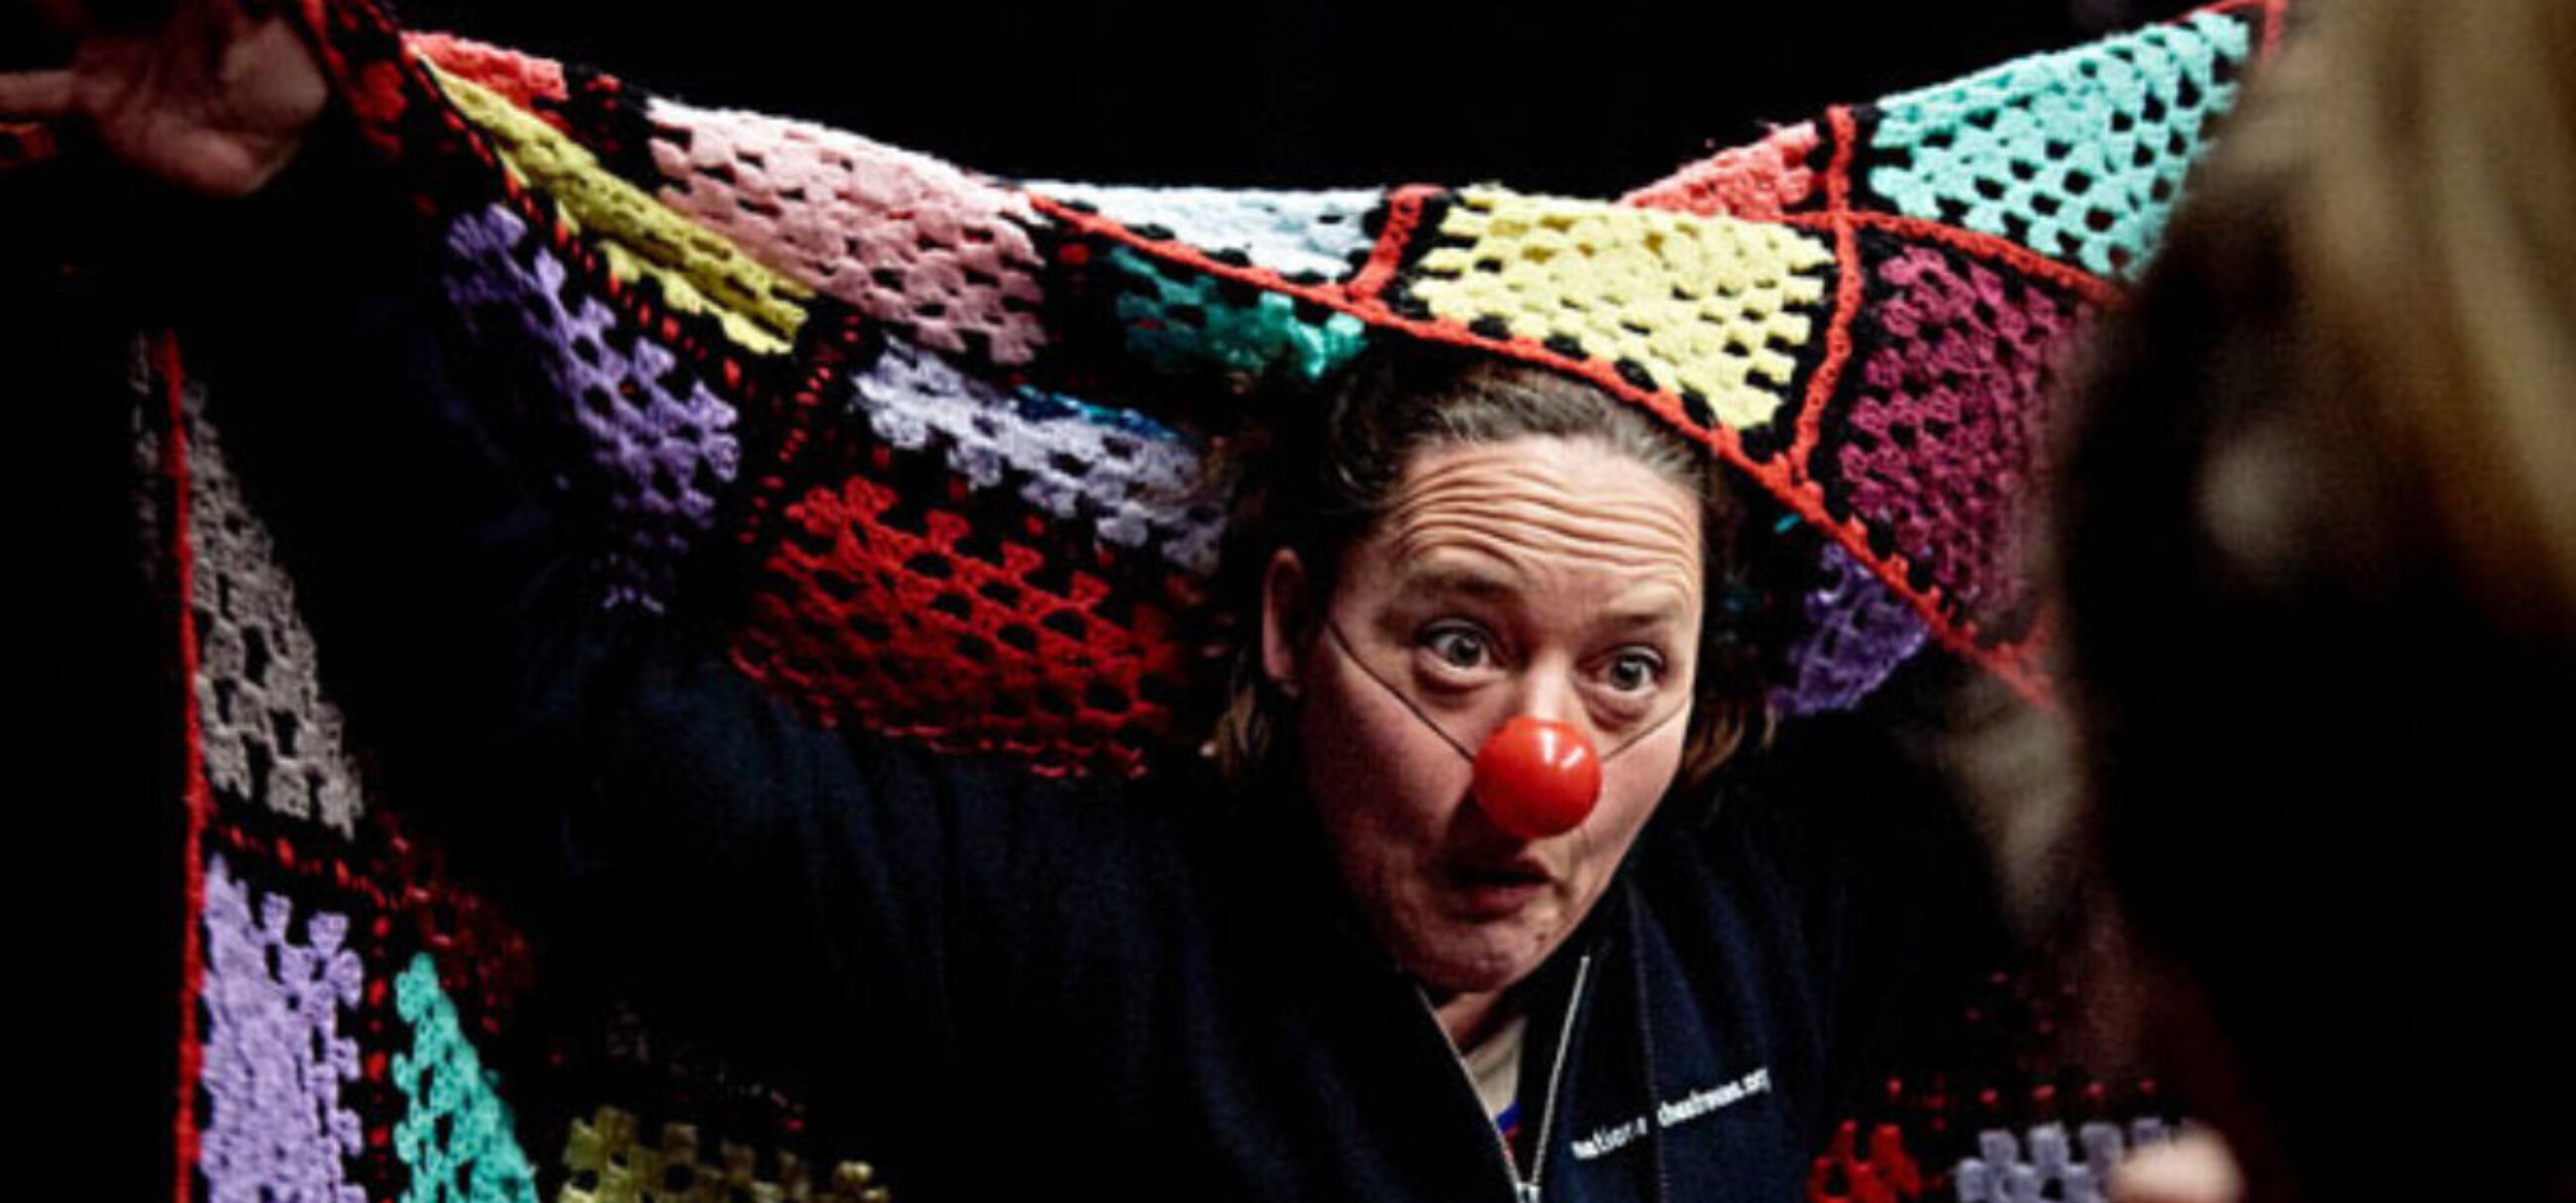 A person with a red nose makes a clown like facial expression and holds a crocheted blanket up behind them.